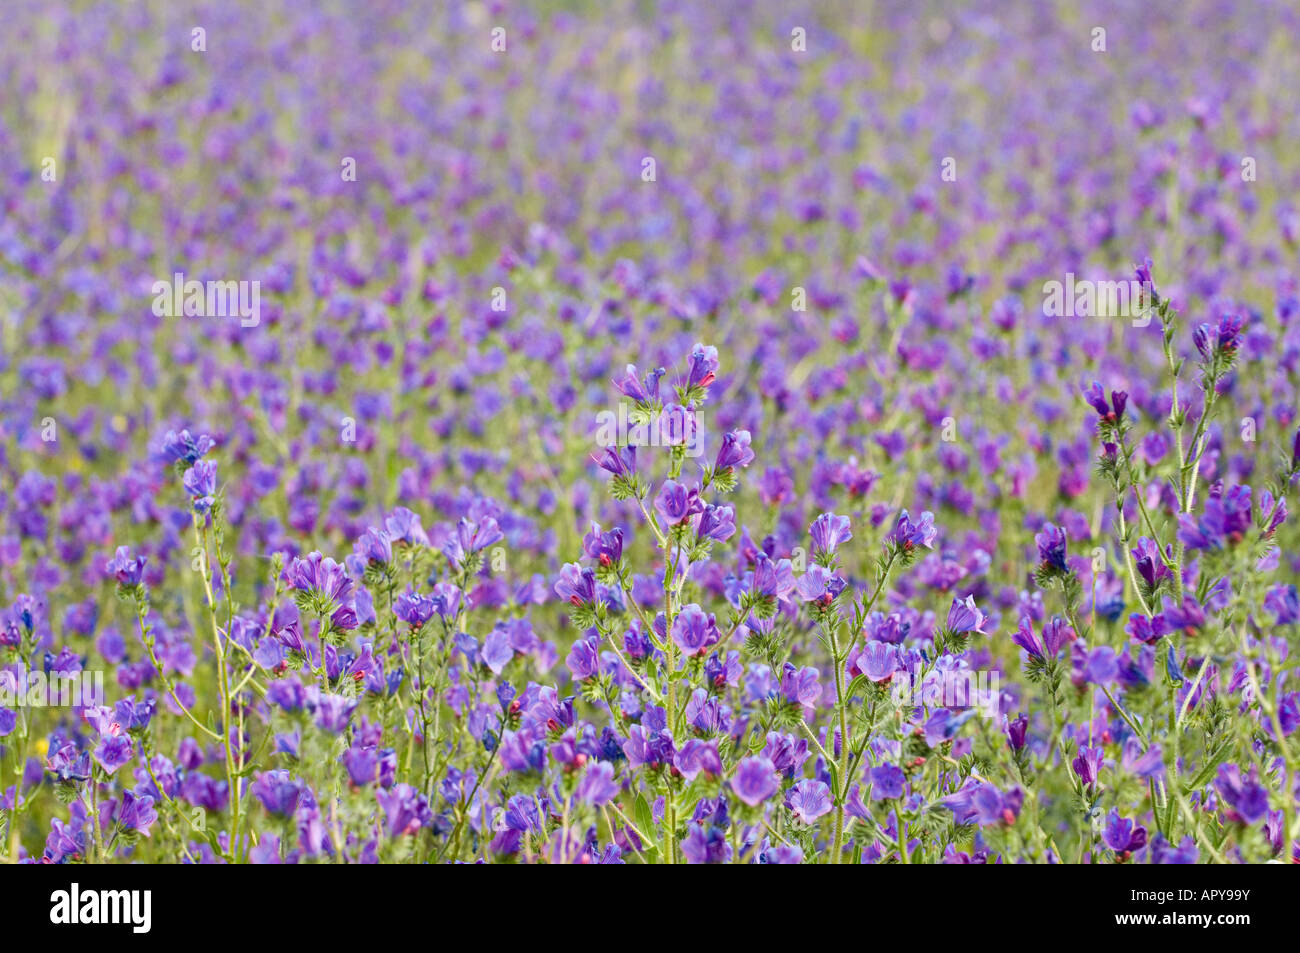 Patterson's Curse Echium plantagineum native to southern and western Europe invasive pasture weed flowering Avon Valley Australi Stock Photo